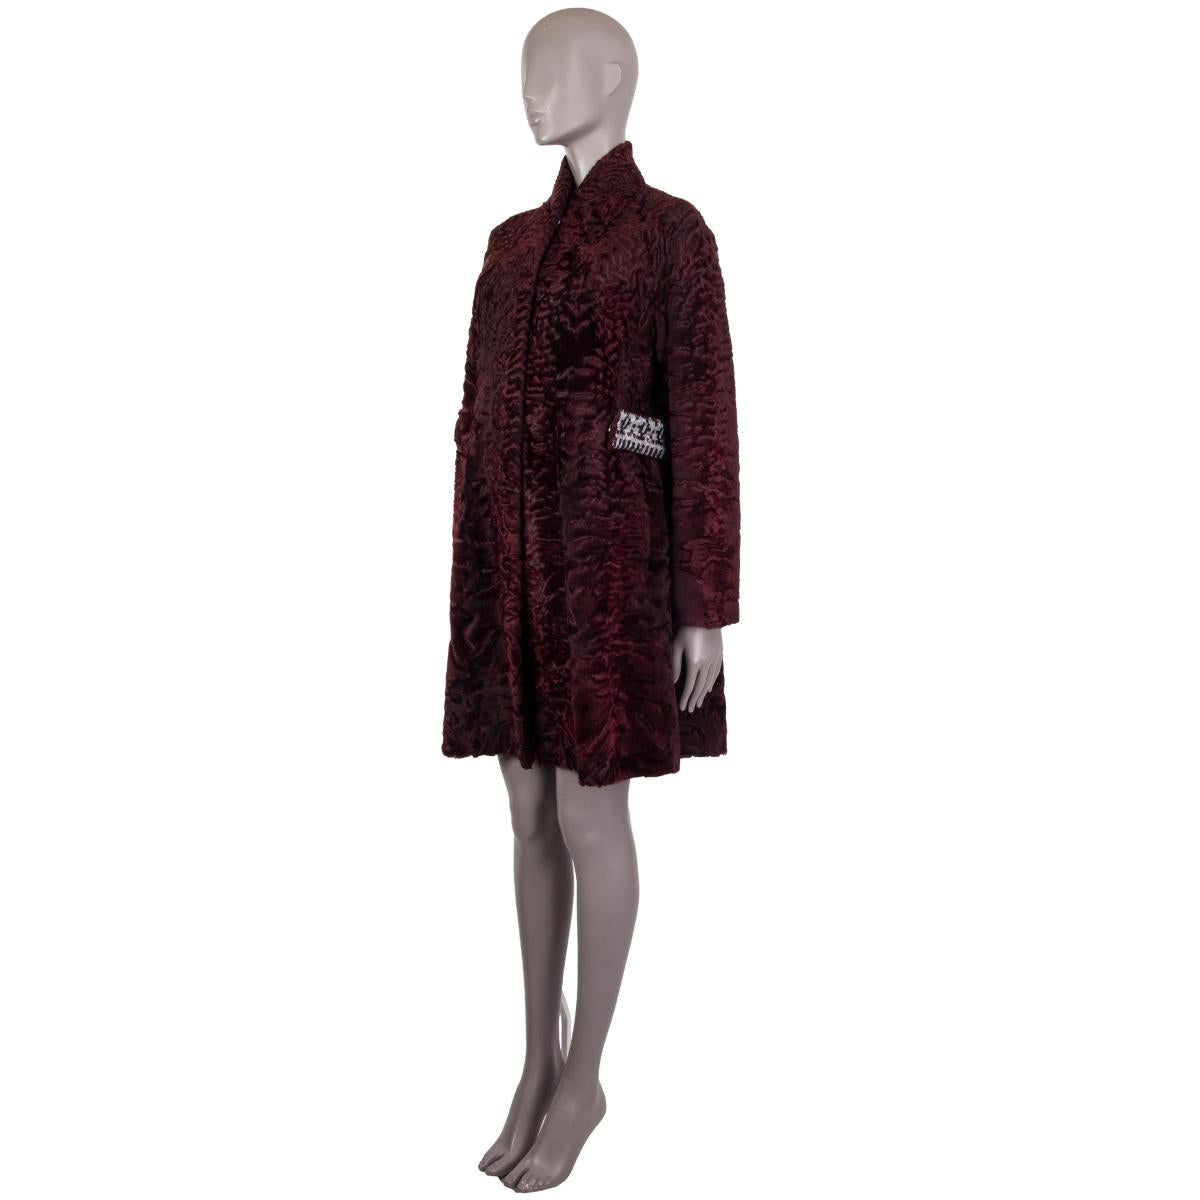 Christian Dior coat in burgundy Astrakhan lamb fur coat. With split neck and two slit pockets on the sides. Featured reversible waistband in fur on one side and burgundy and white sequins on the reverse with two snap closures. Closes with concealed